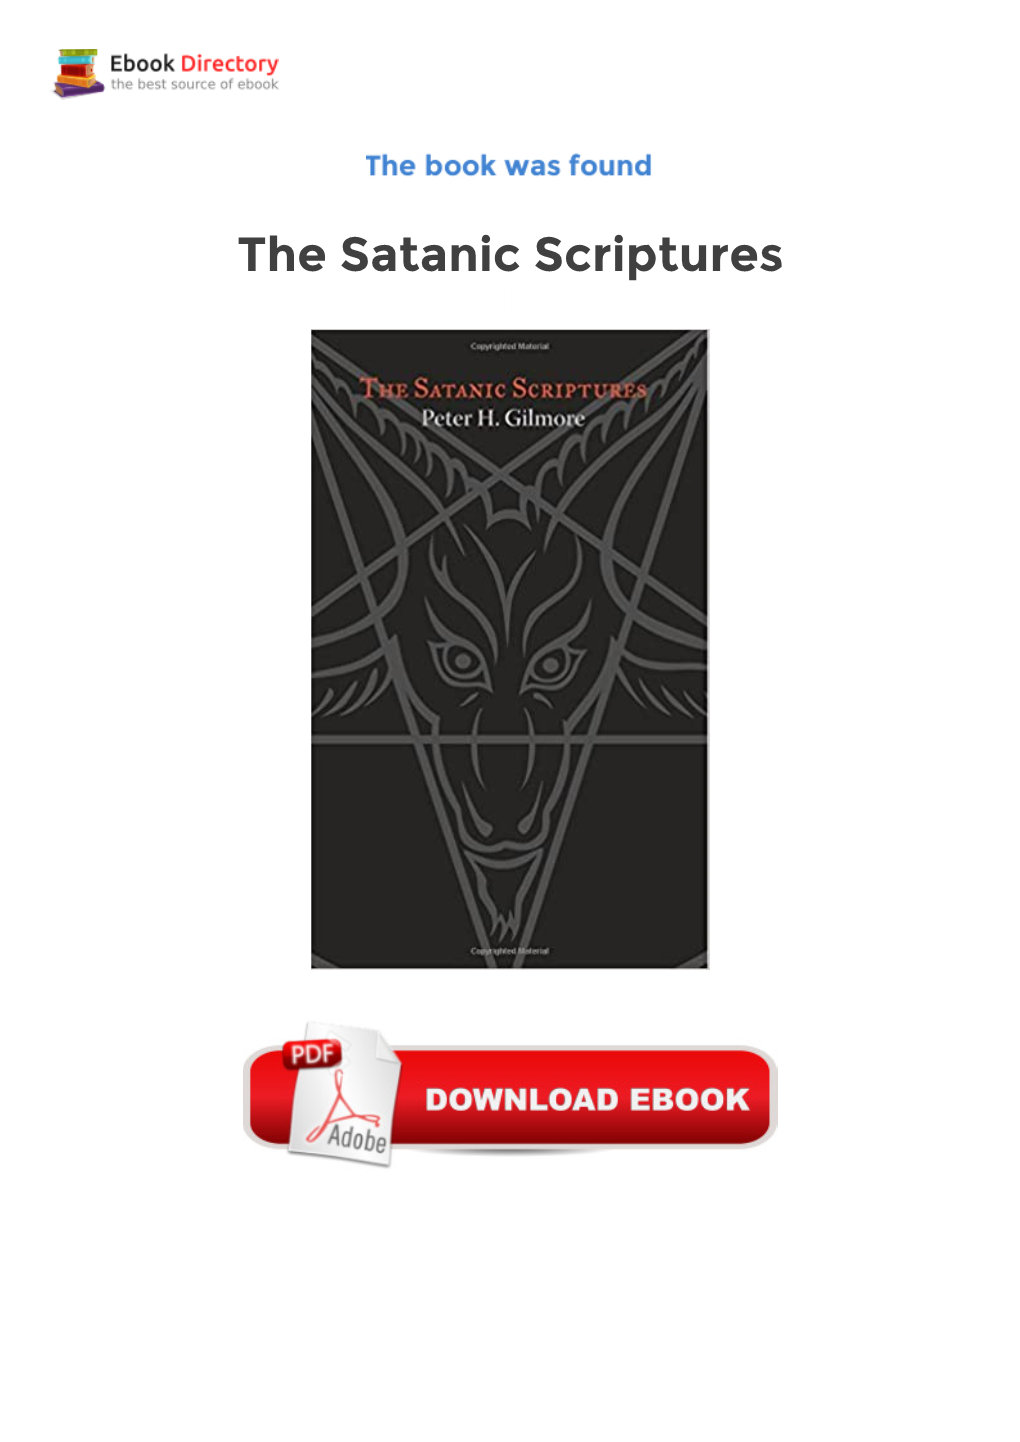 The Satanic Scriptures PDF the Satanic Scriptures Hands Down the Wit, Wisdom and Diabolical Perspective of the Church of Satanã¢Â‚¬Â„¢S High Priest, Magus Peter H